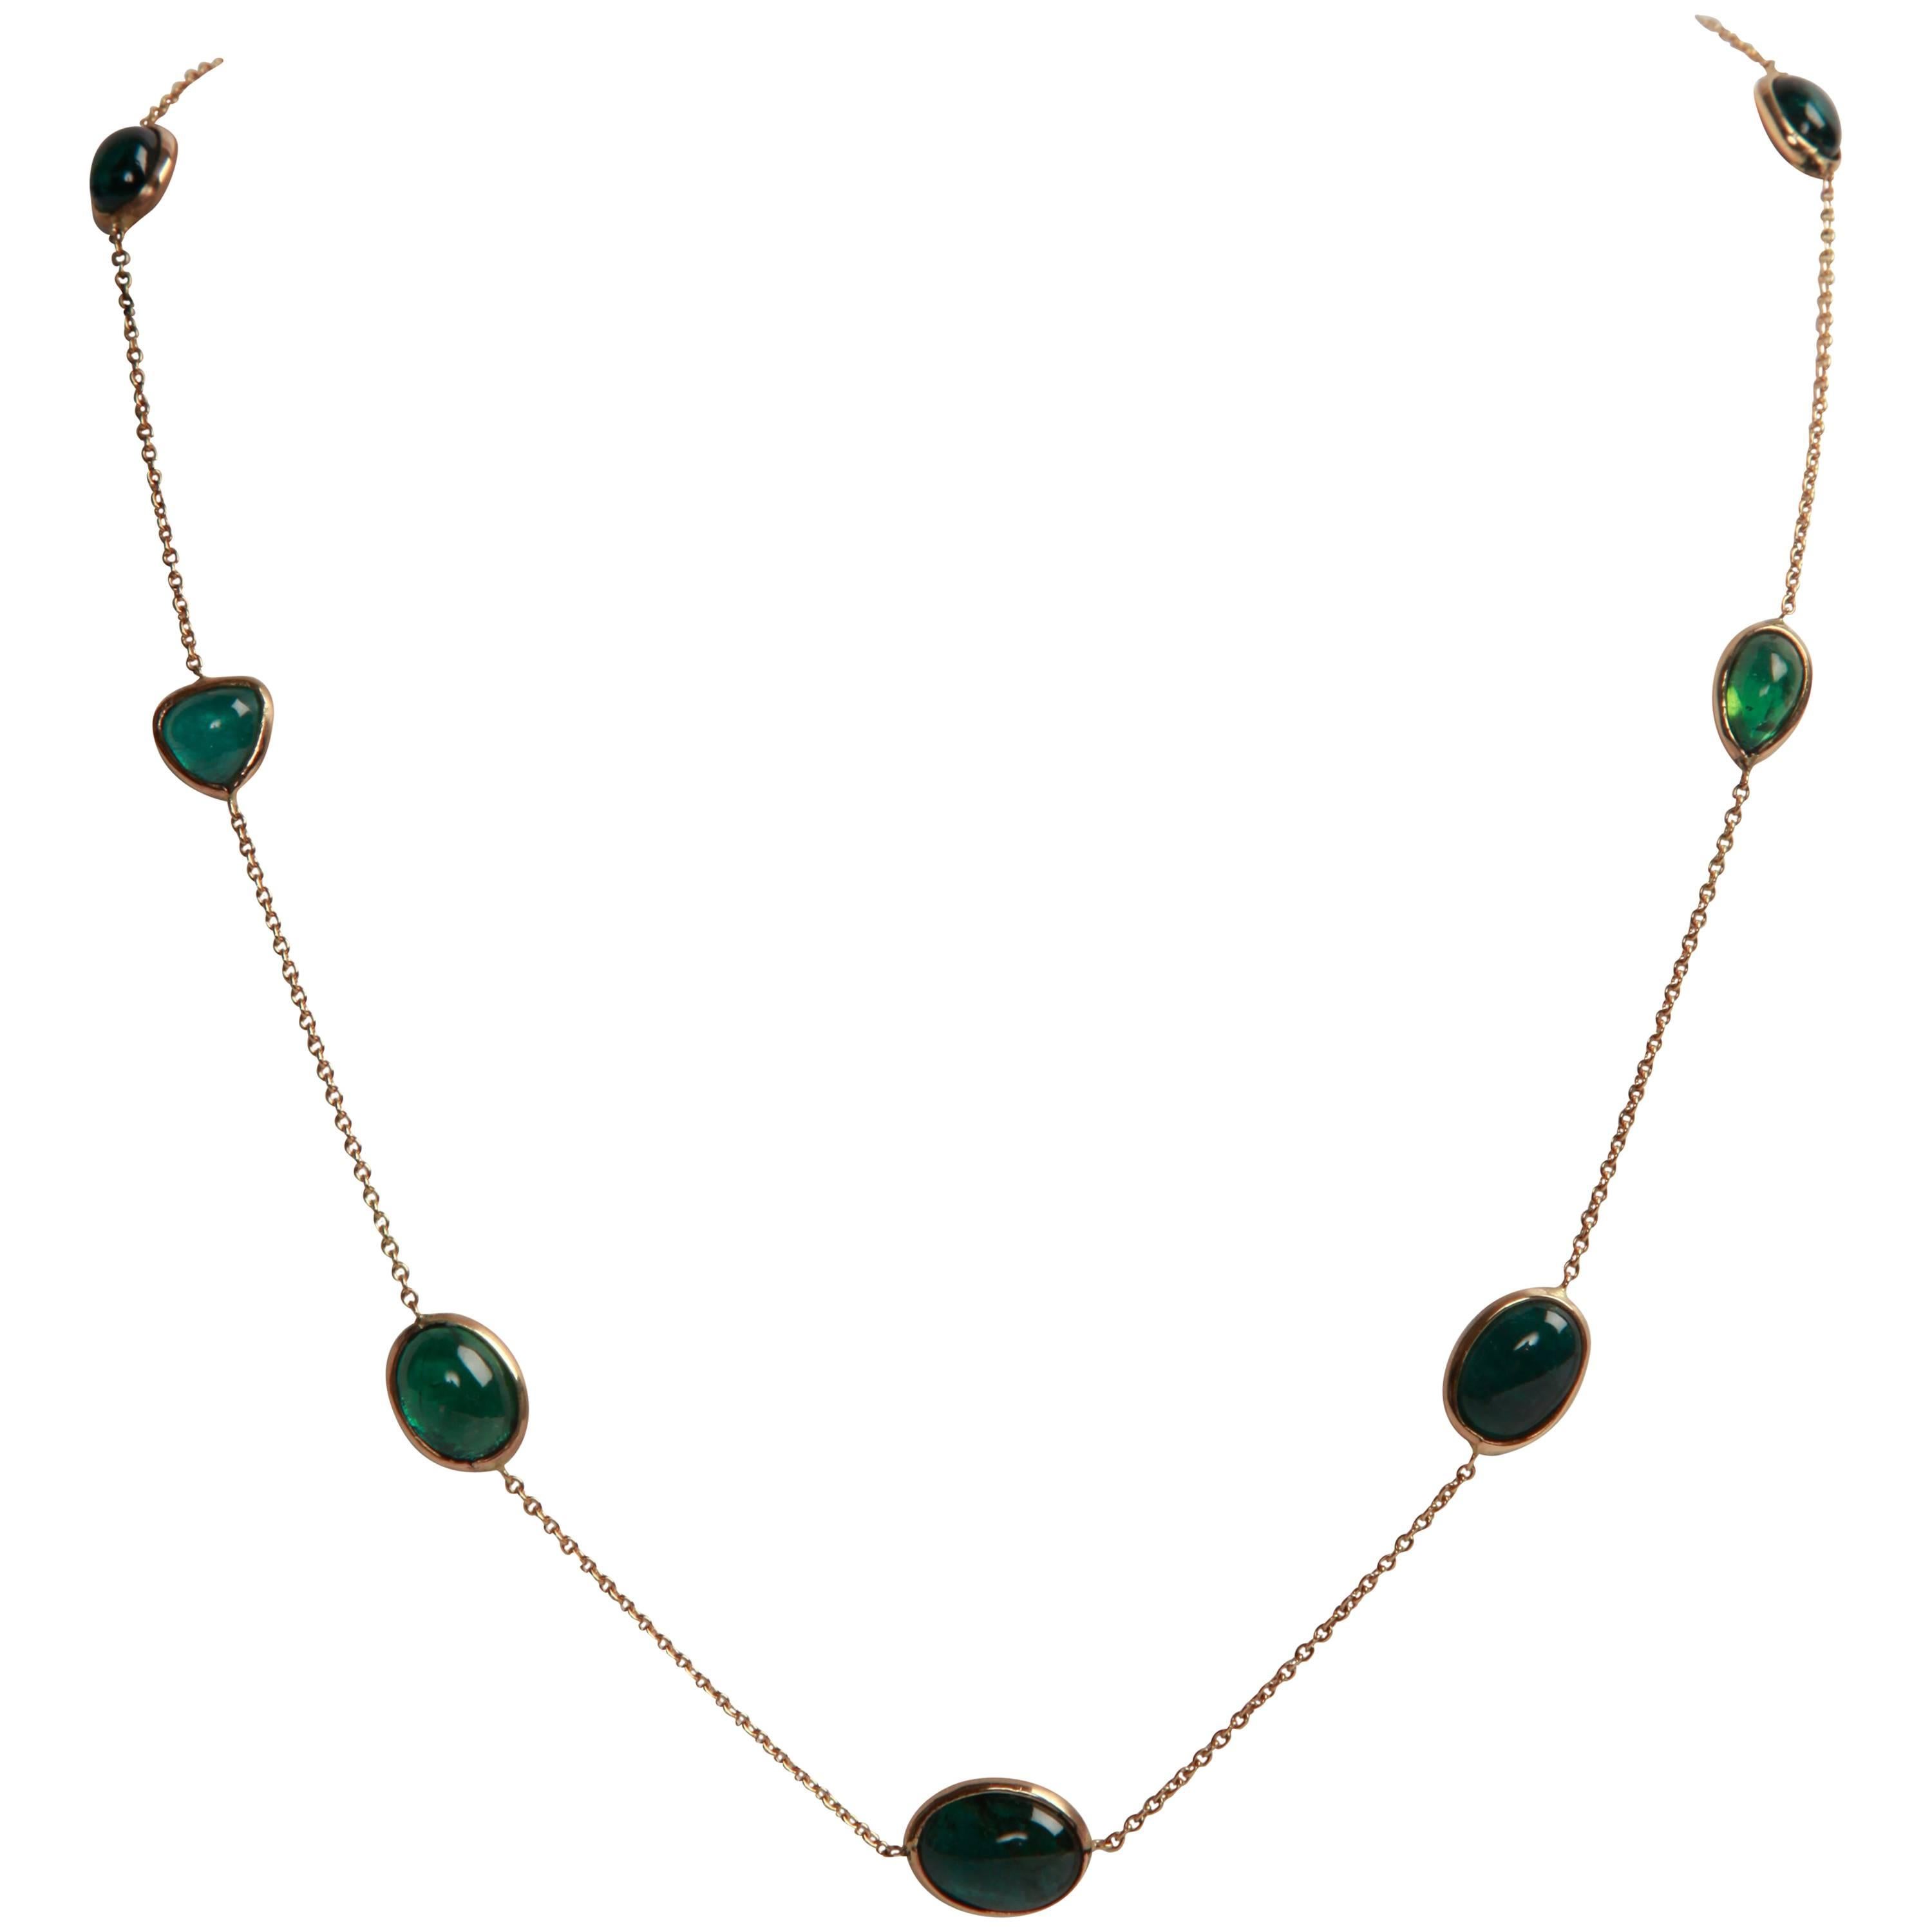 Green Tourmaline Cabochons and Yellow Gold Necklace by Marion Jeantet